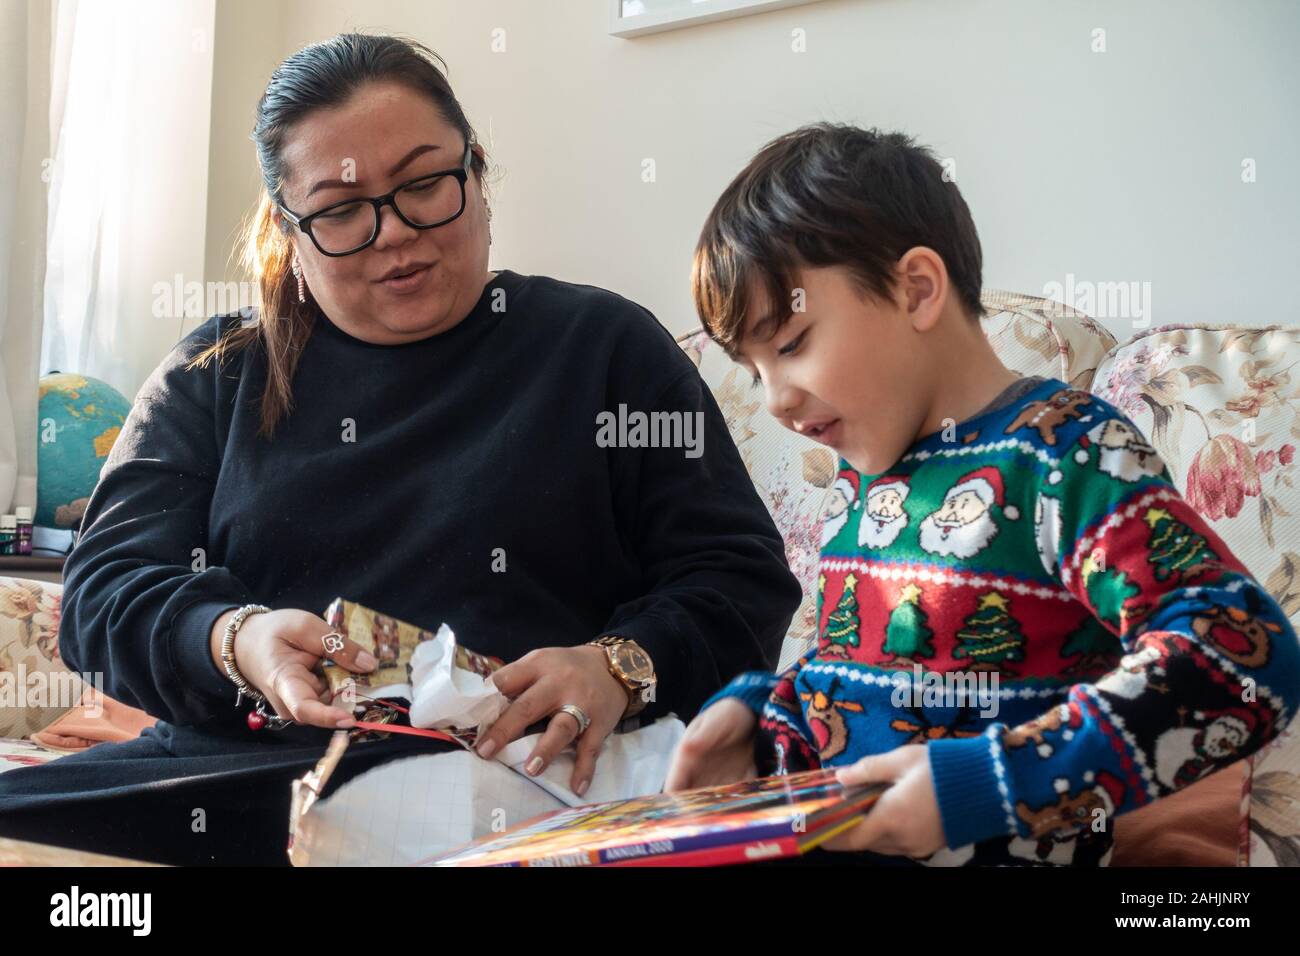 A mother and young son excitedly open a Christmas present together Stock Photo